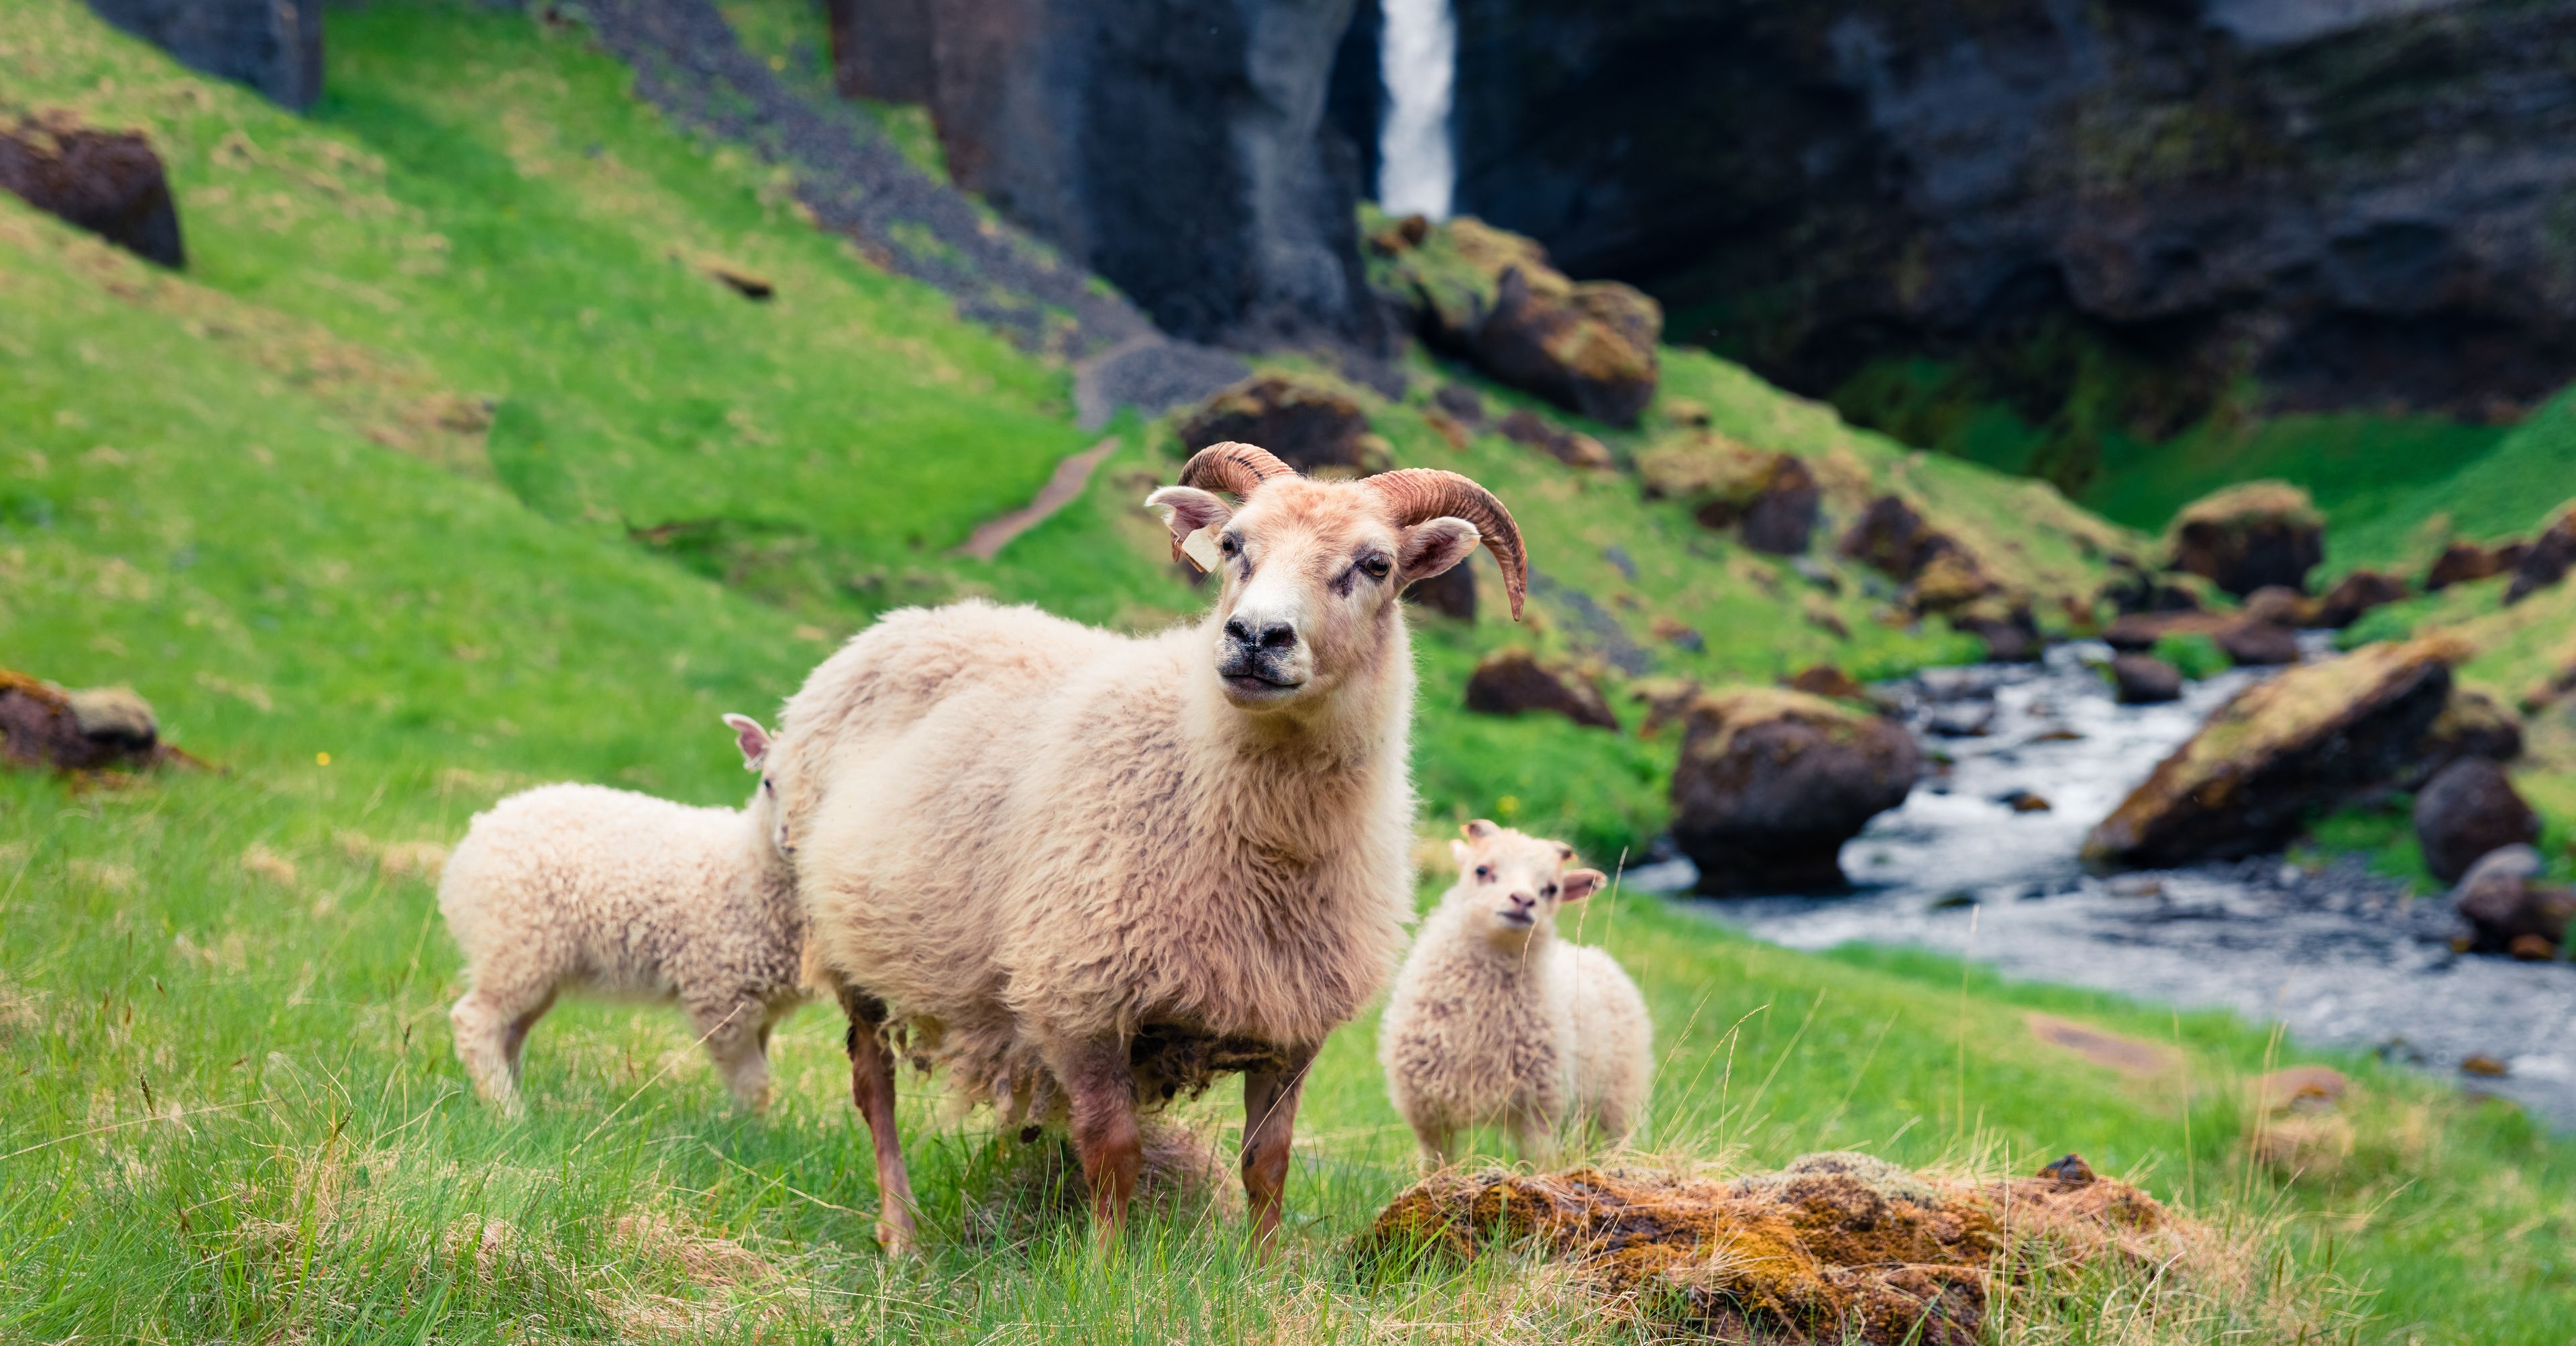 Sheep with two babies on a green lawn with a waterfall in the background